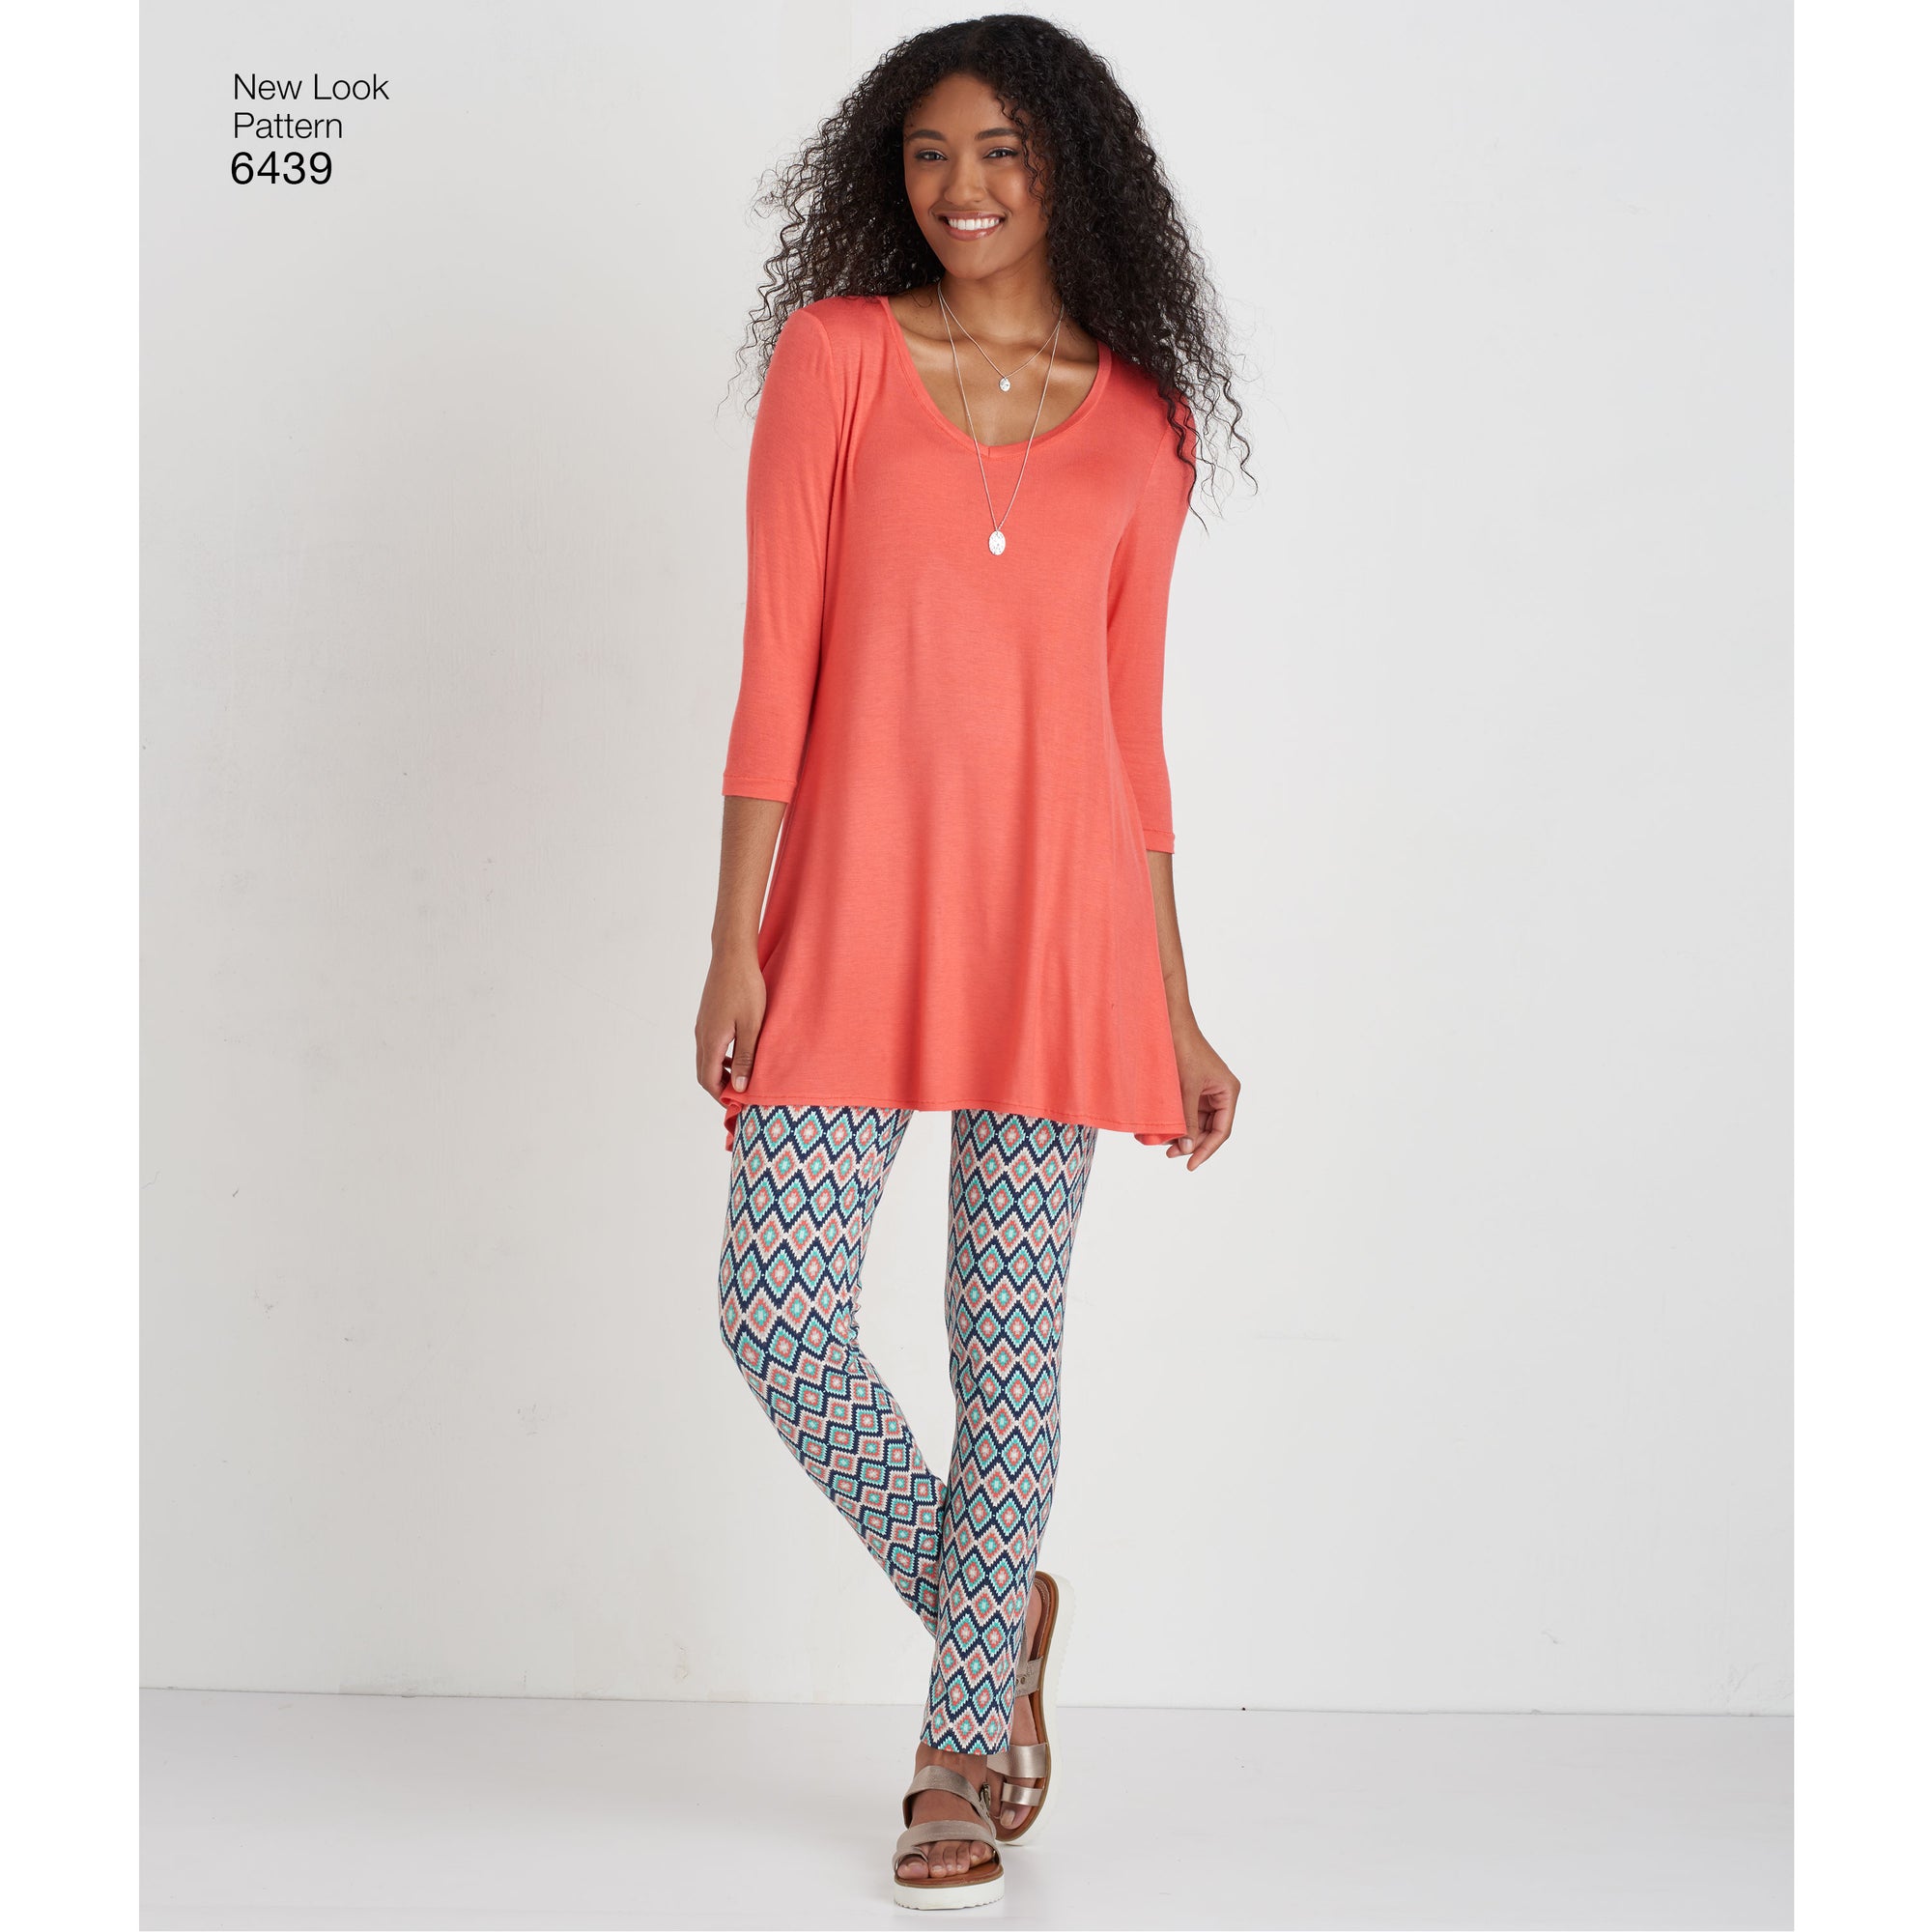 6439 Misses' Knit Tunics with Leggings